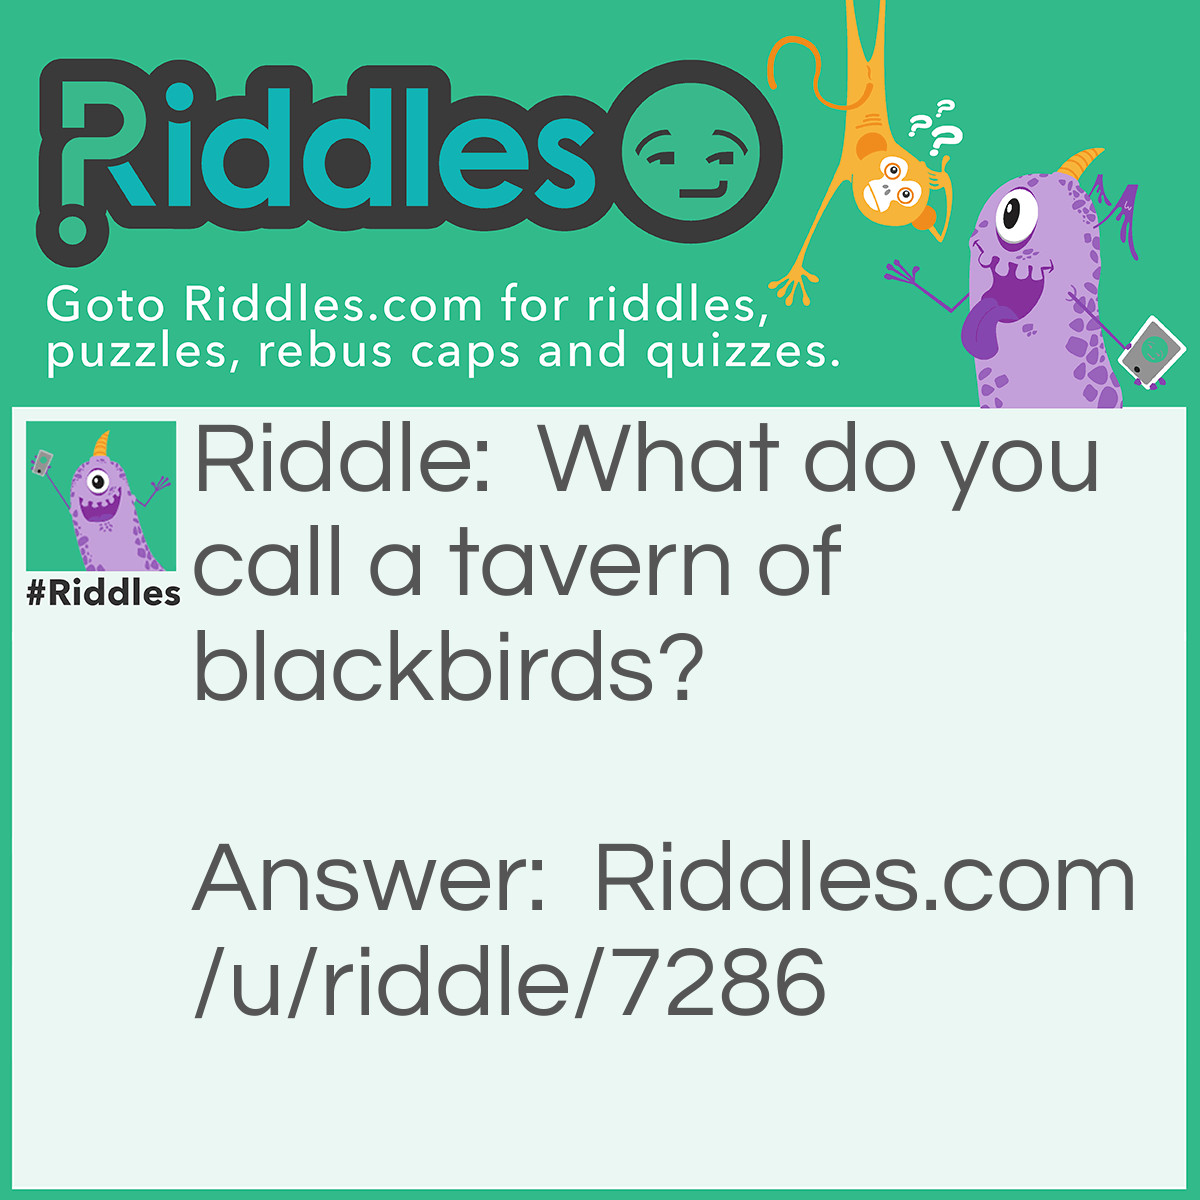 Riddle: What do you call a tavern of blackbirds? Answer: Crowbar